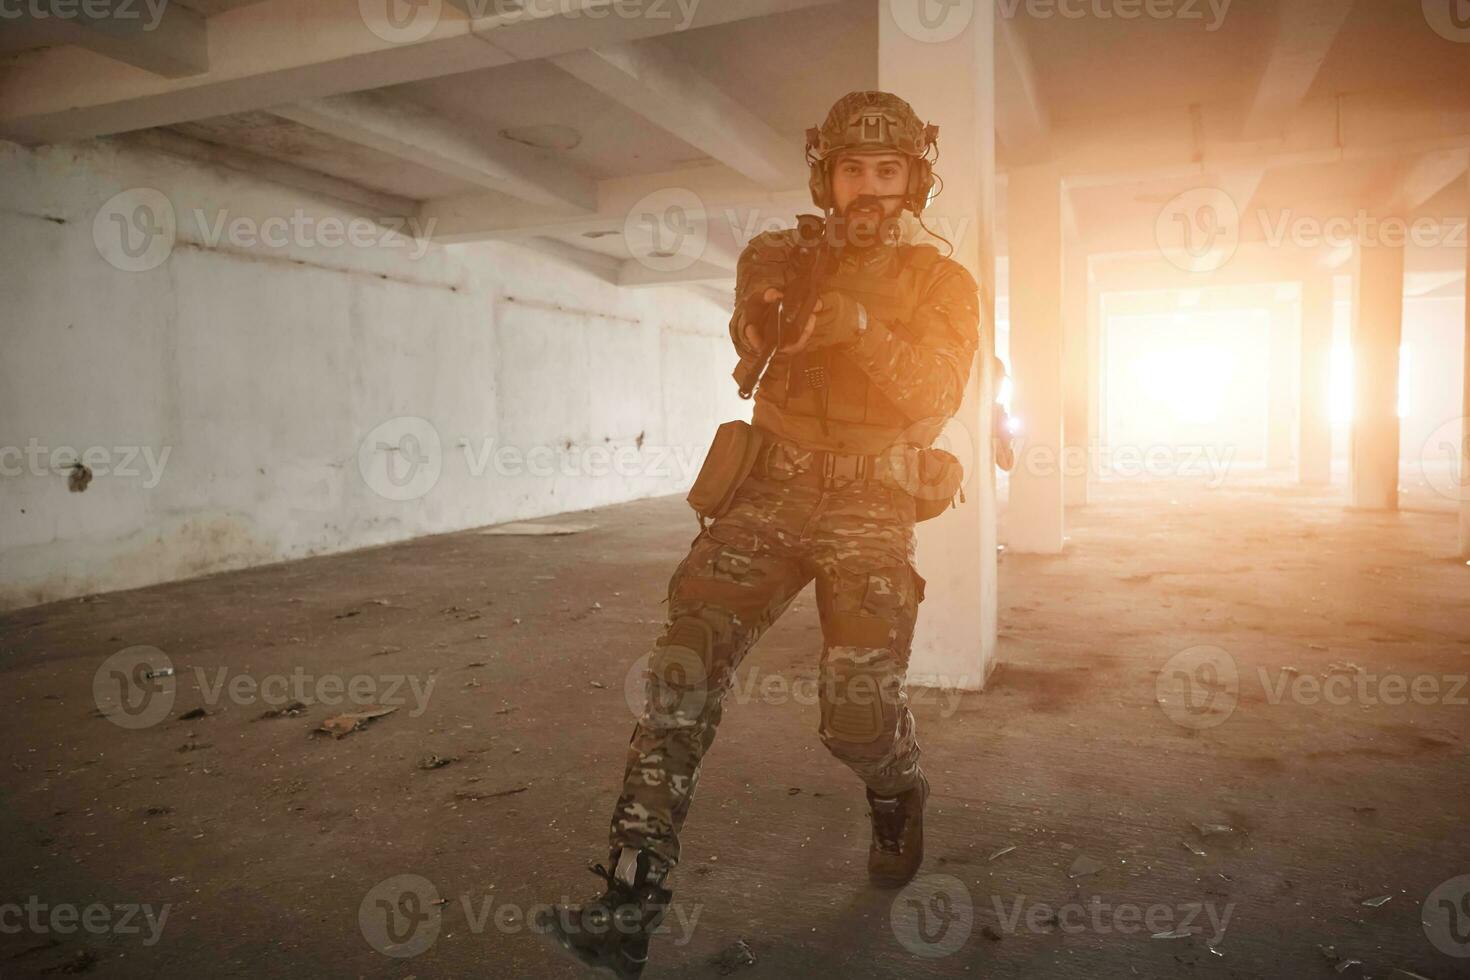 military troops in action urban environment photo